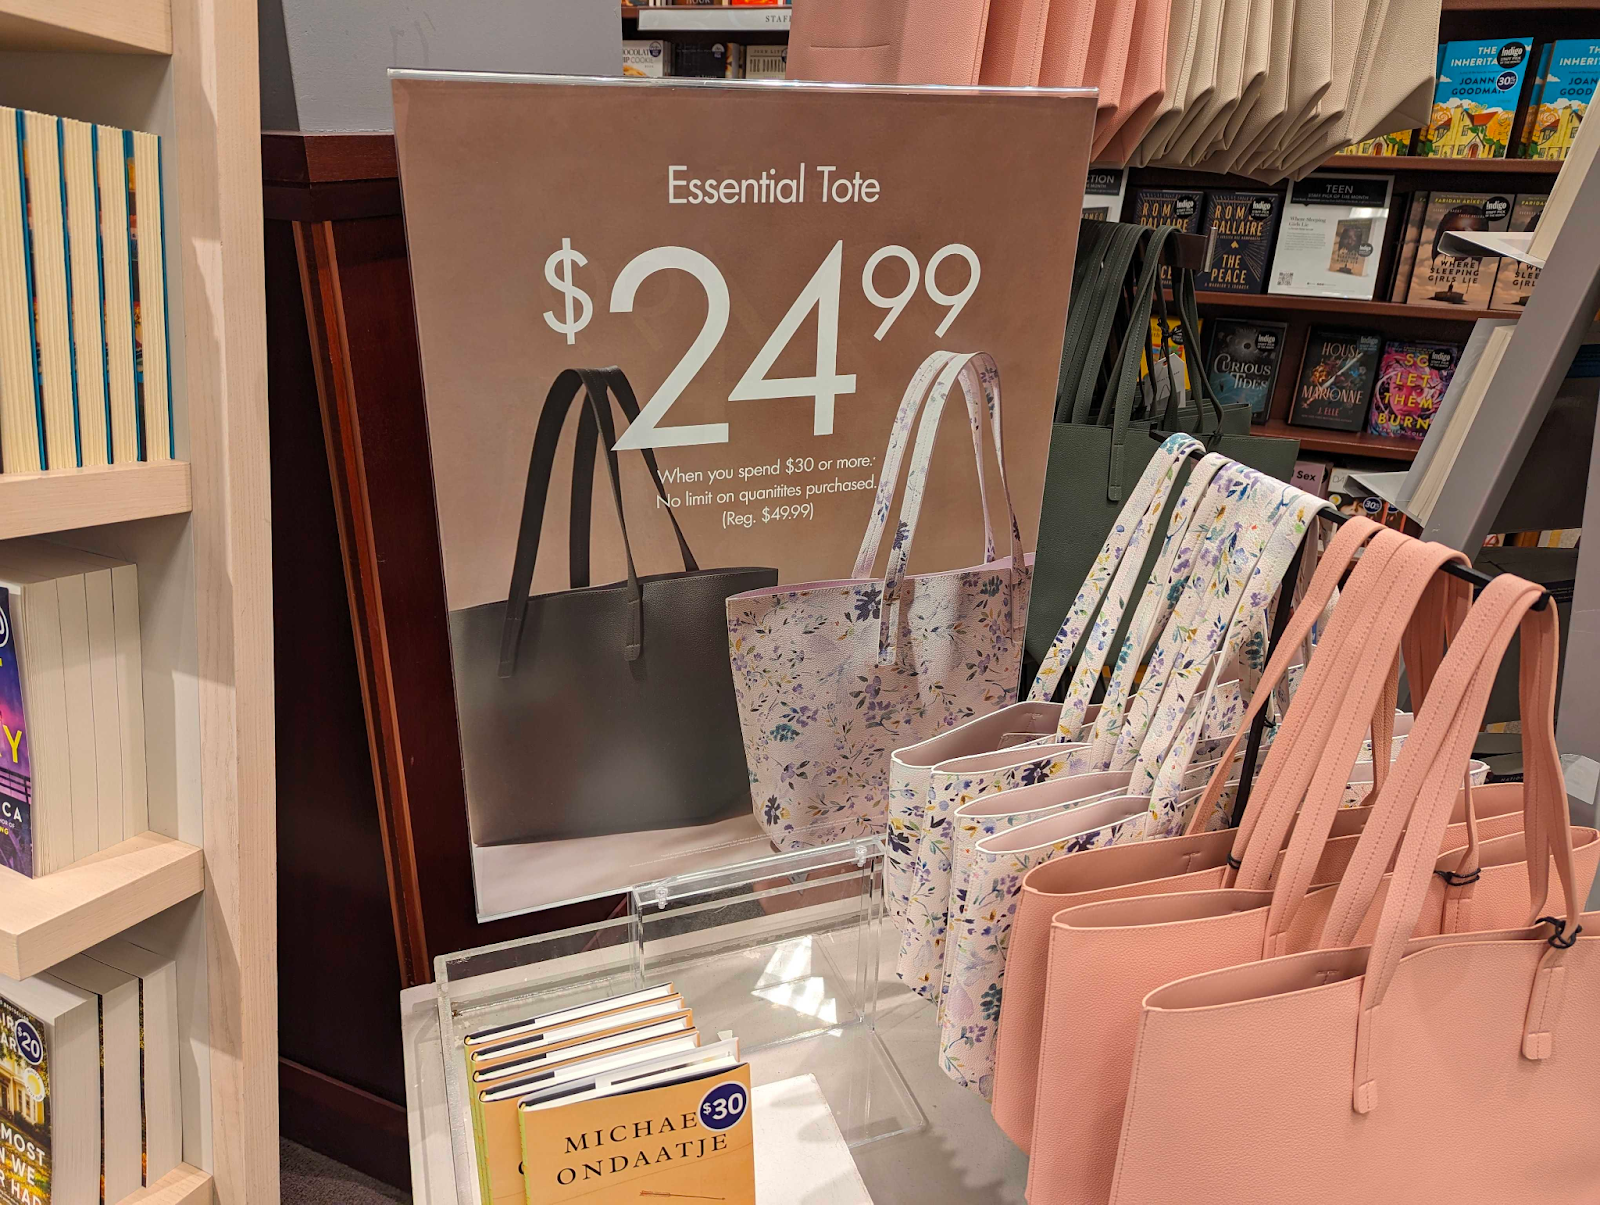 Image of Indigo's offer for an essential tote at half the price when customers spend $30 or more.